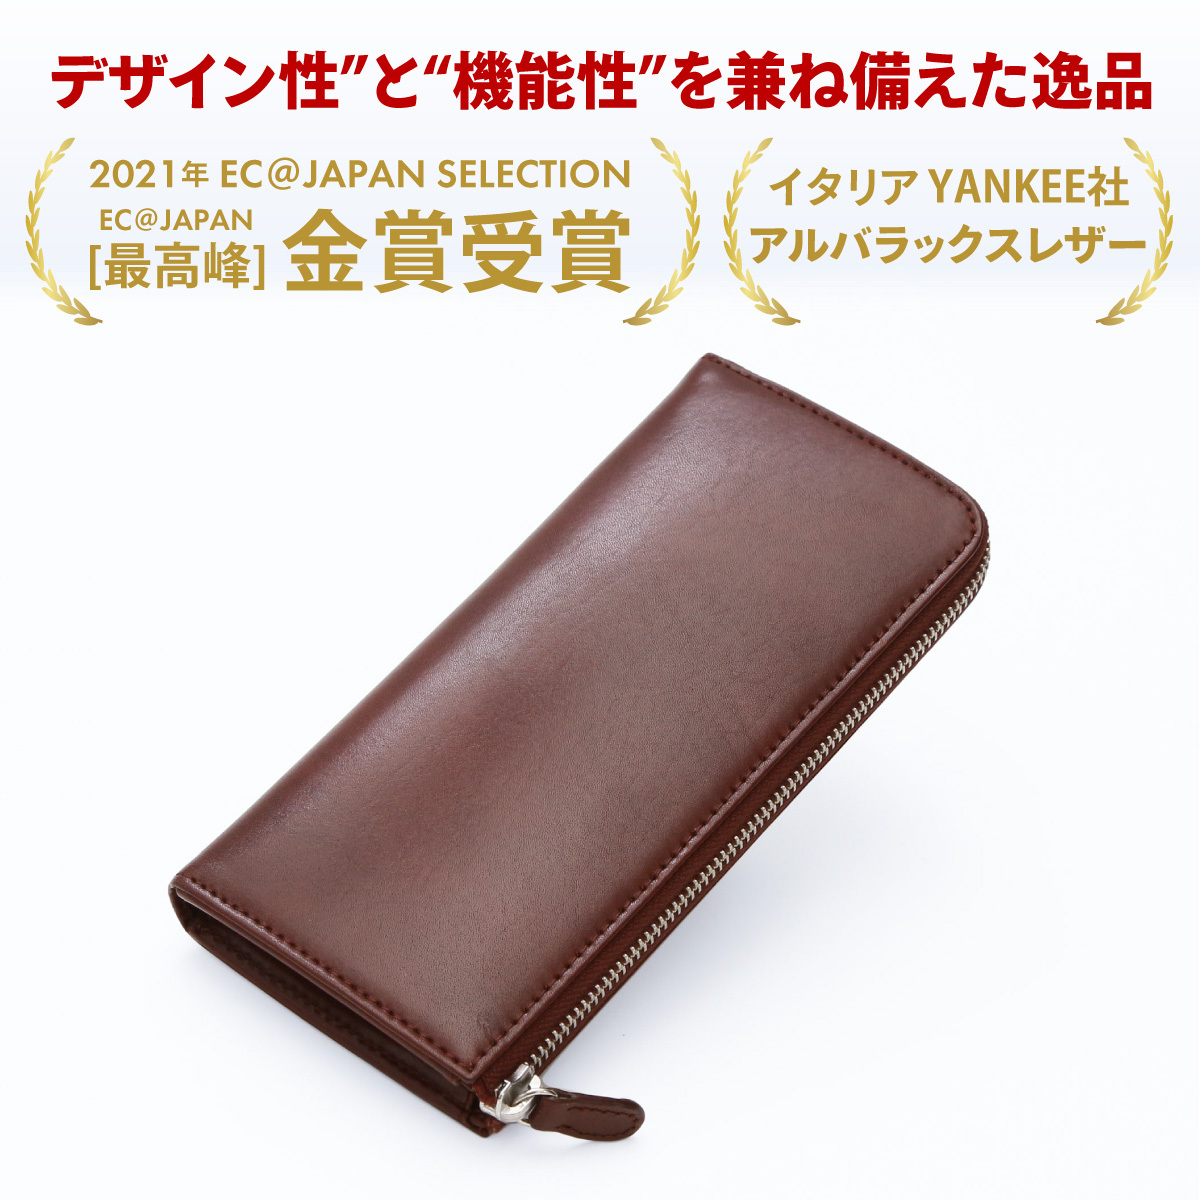  long wallet men's original leather purse lady's skimming prevention high capacity Barberini present gift name inserting possible 20 fee 30 fee 40 fee 50 fee 60 fee 